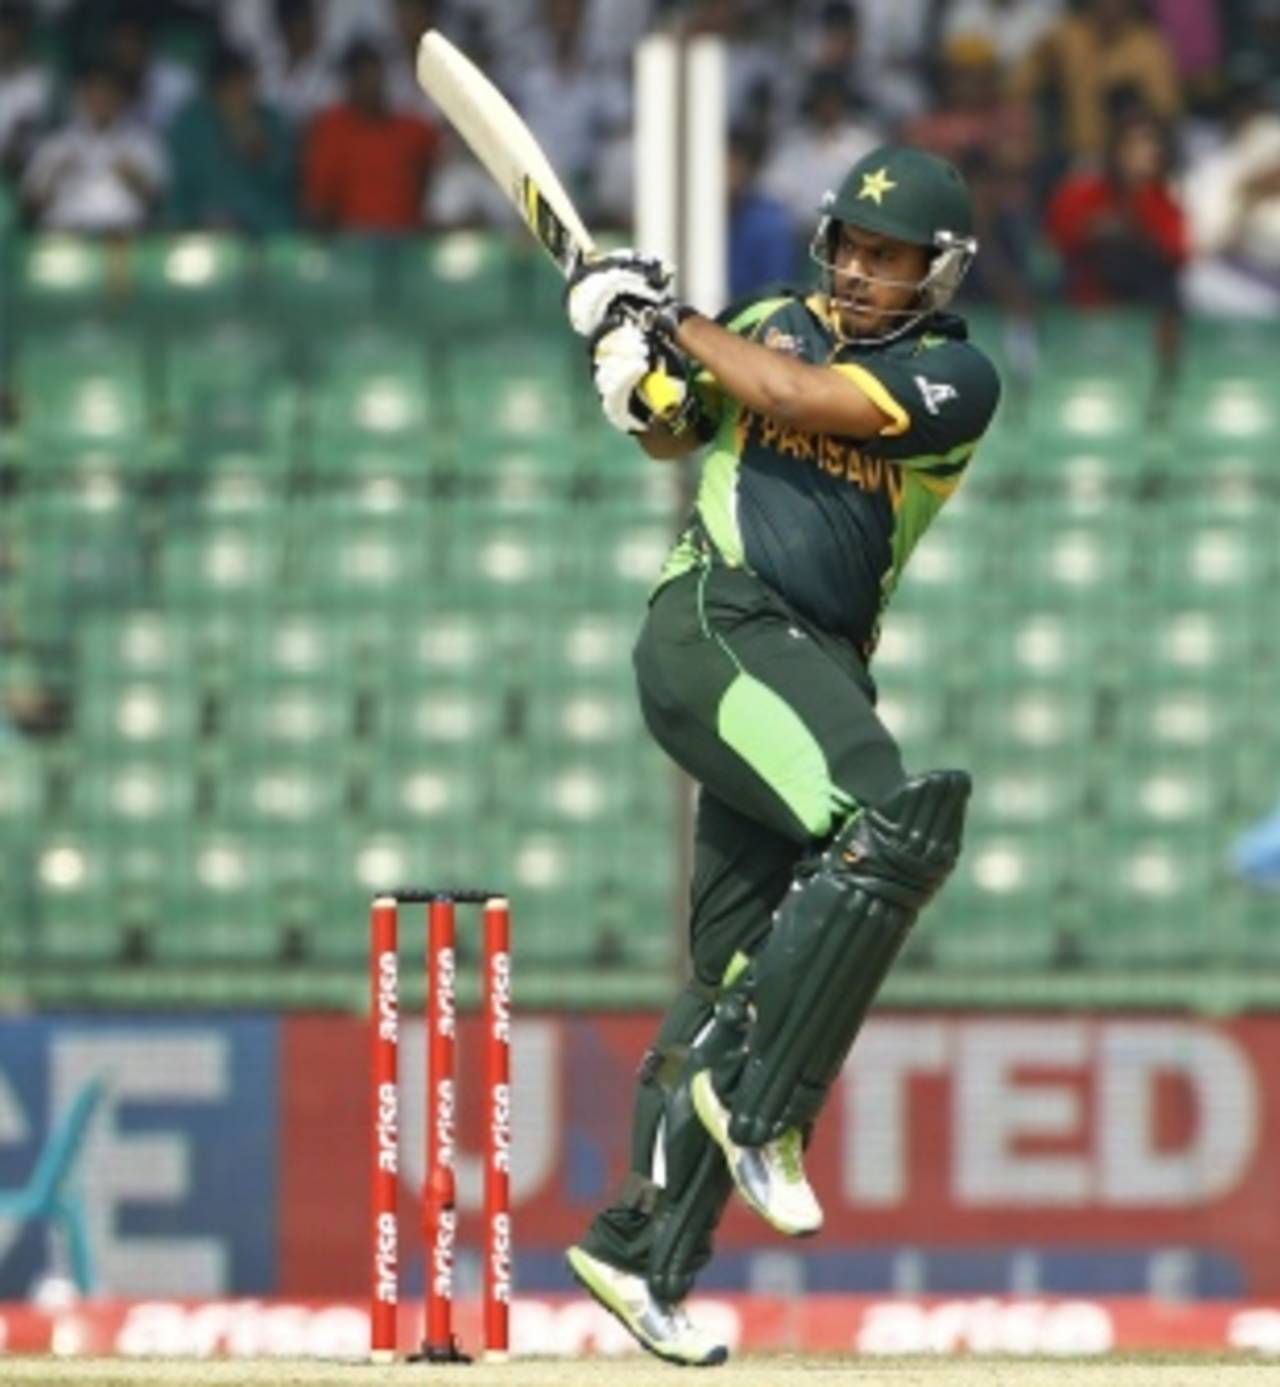 Sharjeel Khan, who earned a maiden ODI call-up in December last year, was Player of the Tournament in the inaugural Superstars Twenty20 tournament&nbsp;&nbsp;&bull;&nbsp;&nbsp;Associated Press